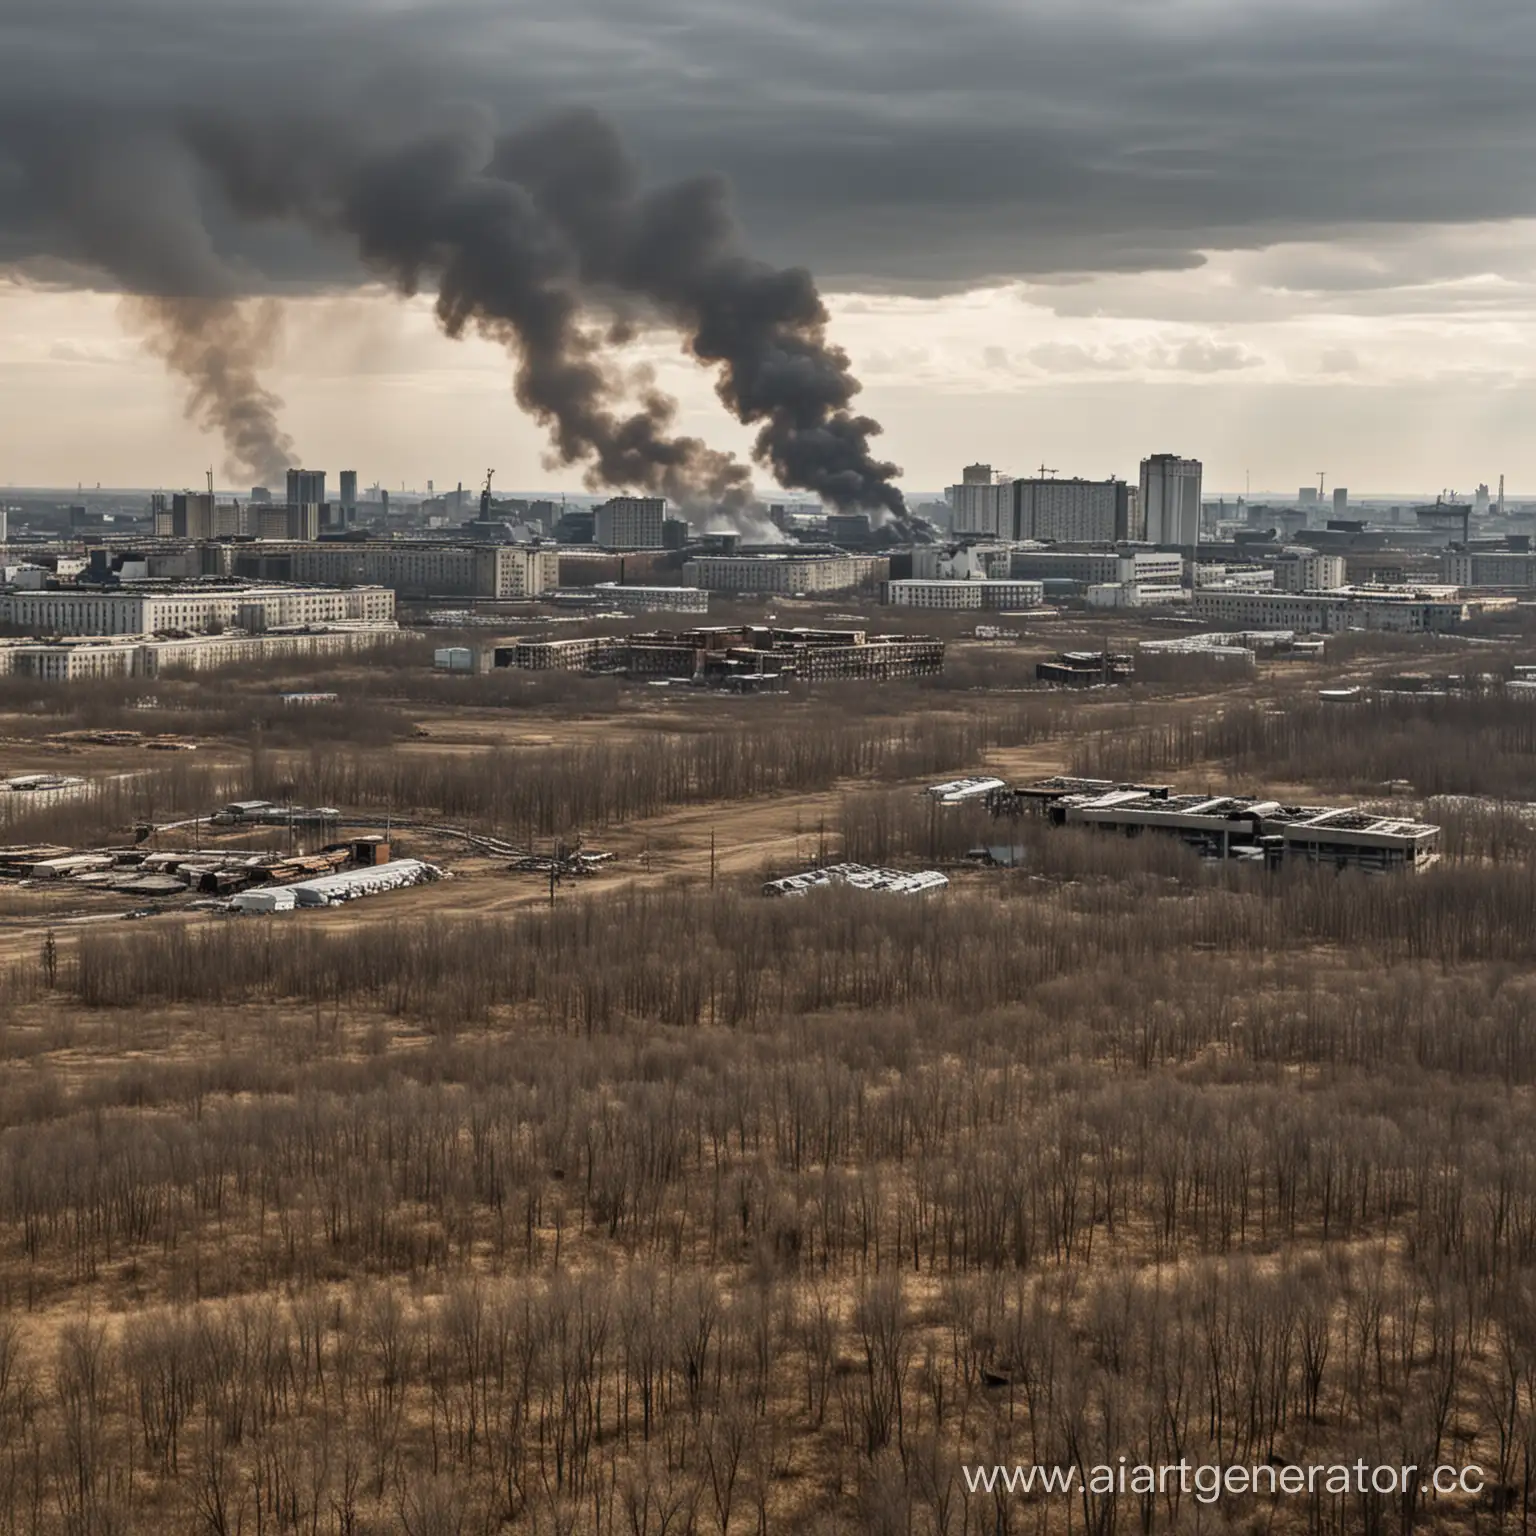 PostApocalyptic-Fallout-in-Russia-Desolate-Cityscape-Amidst-Nuclear-Destruction